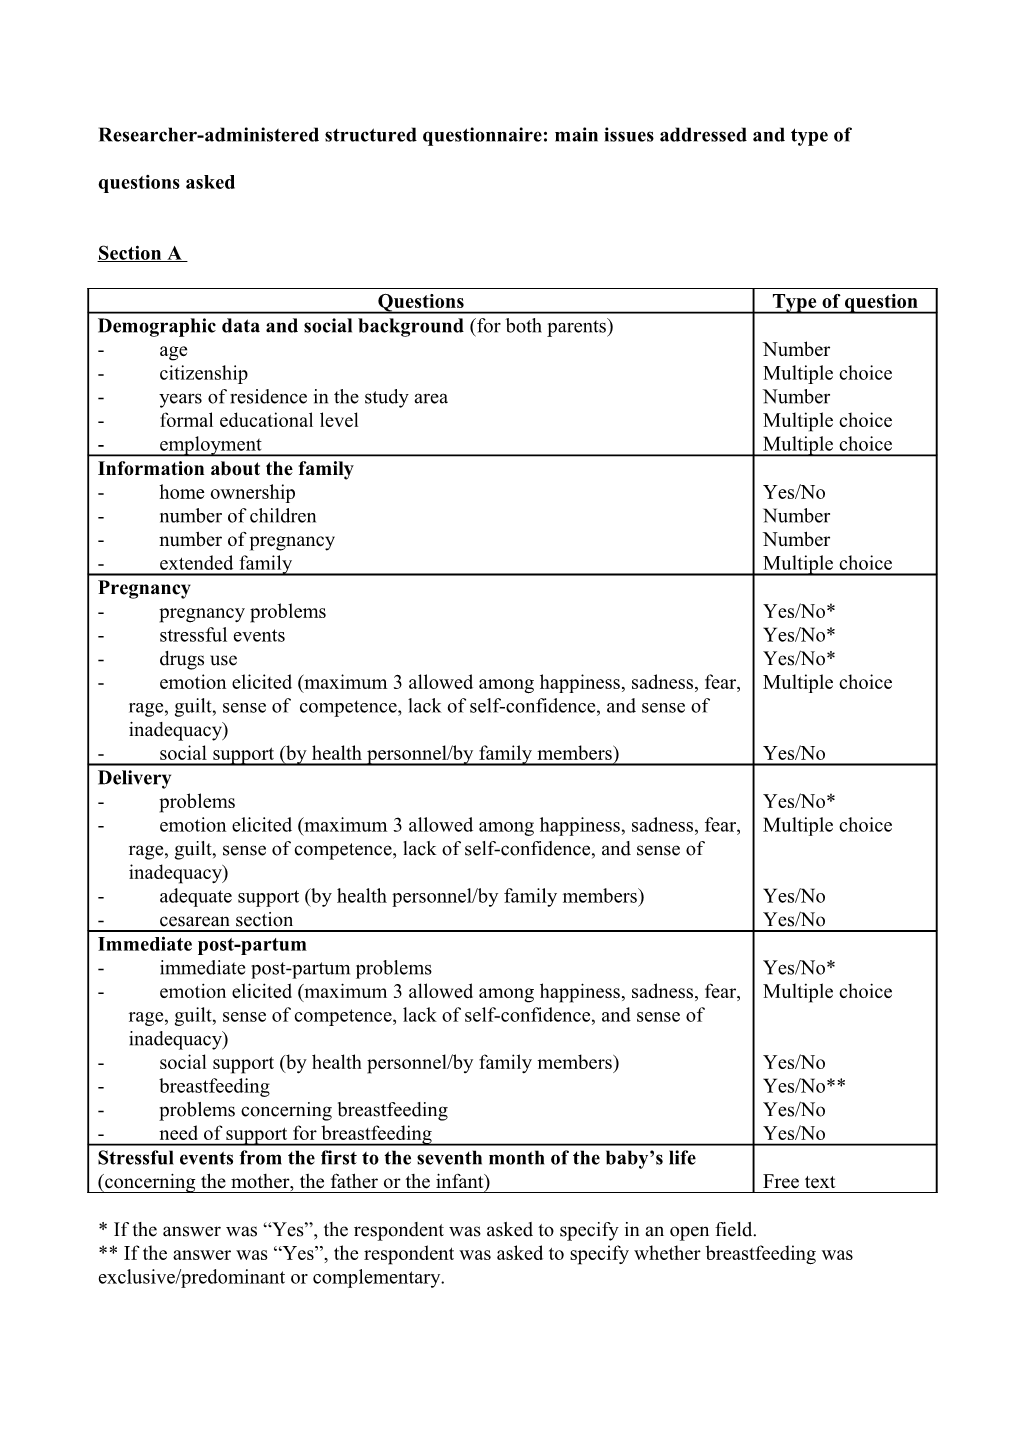 Researcher-Administered Structured Questionnaire: Main Issues Addressed and Type of Questions